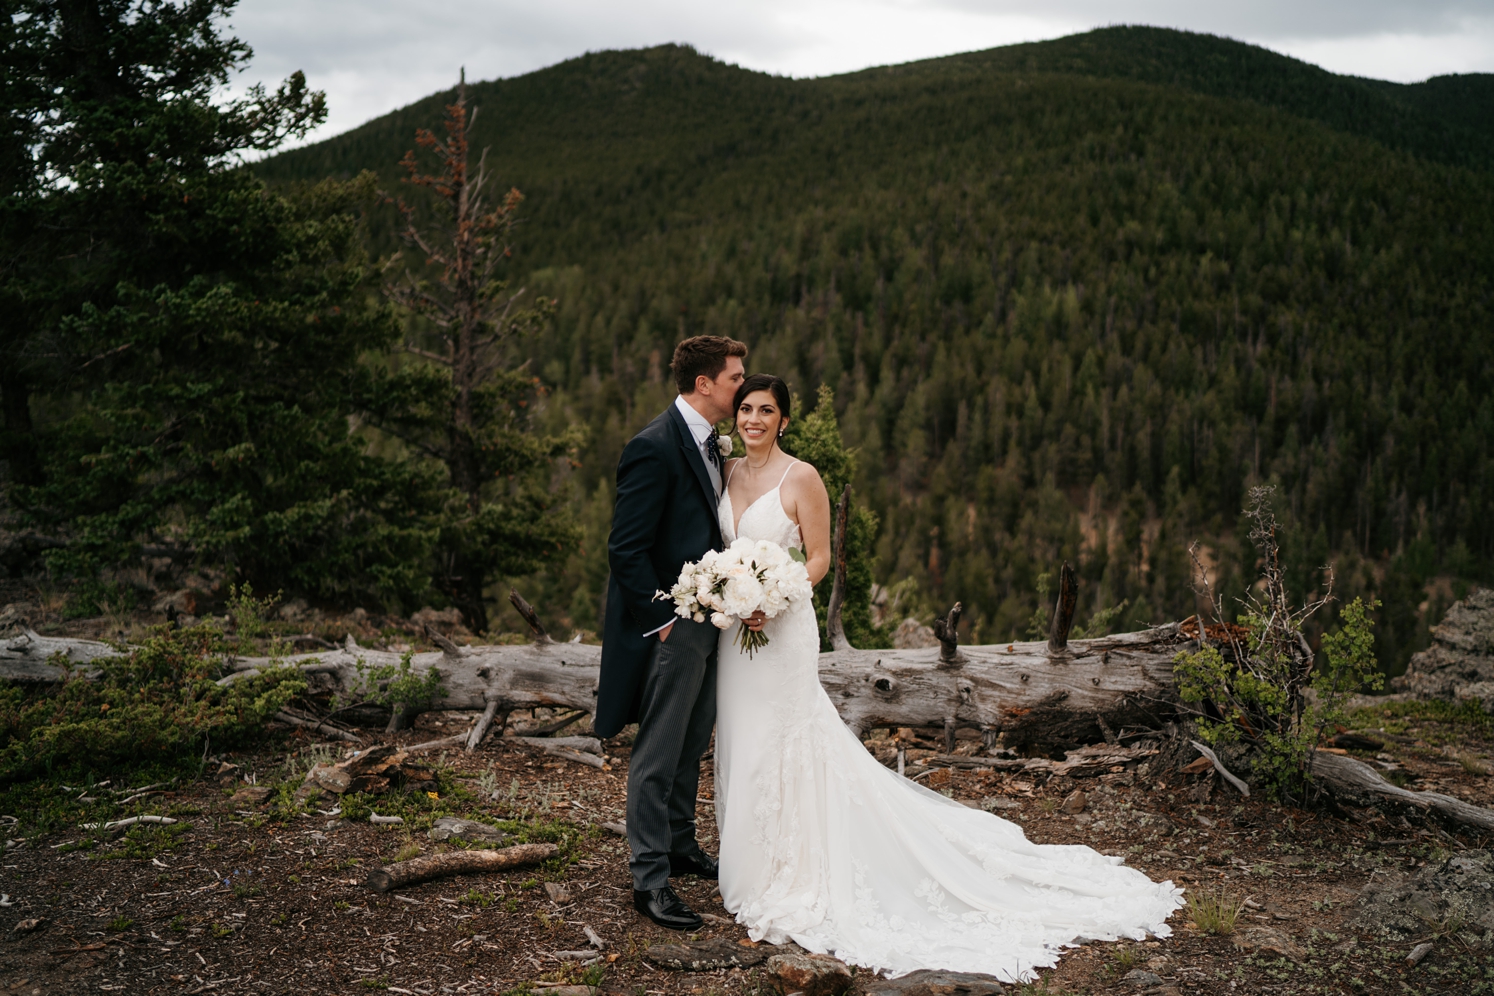 Bride and groom posing in front of mountains at North Star Gatherings | McArthur Weddings and Events